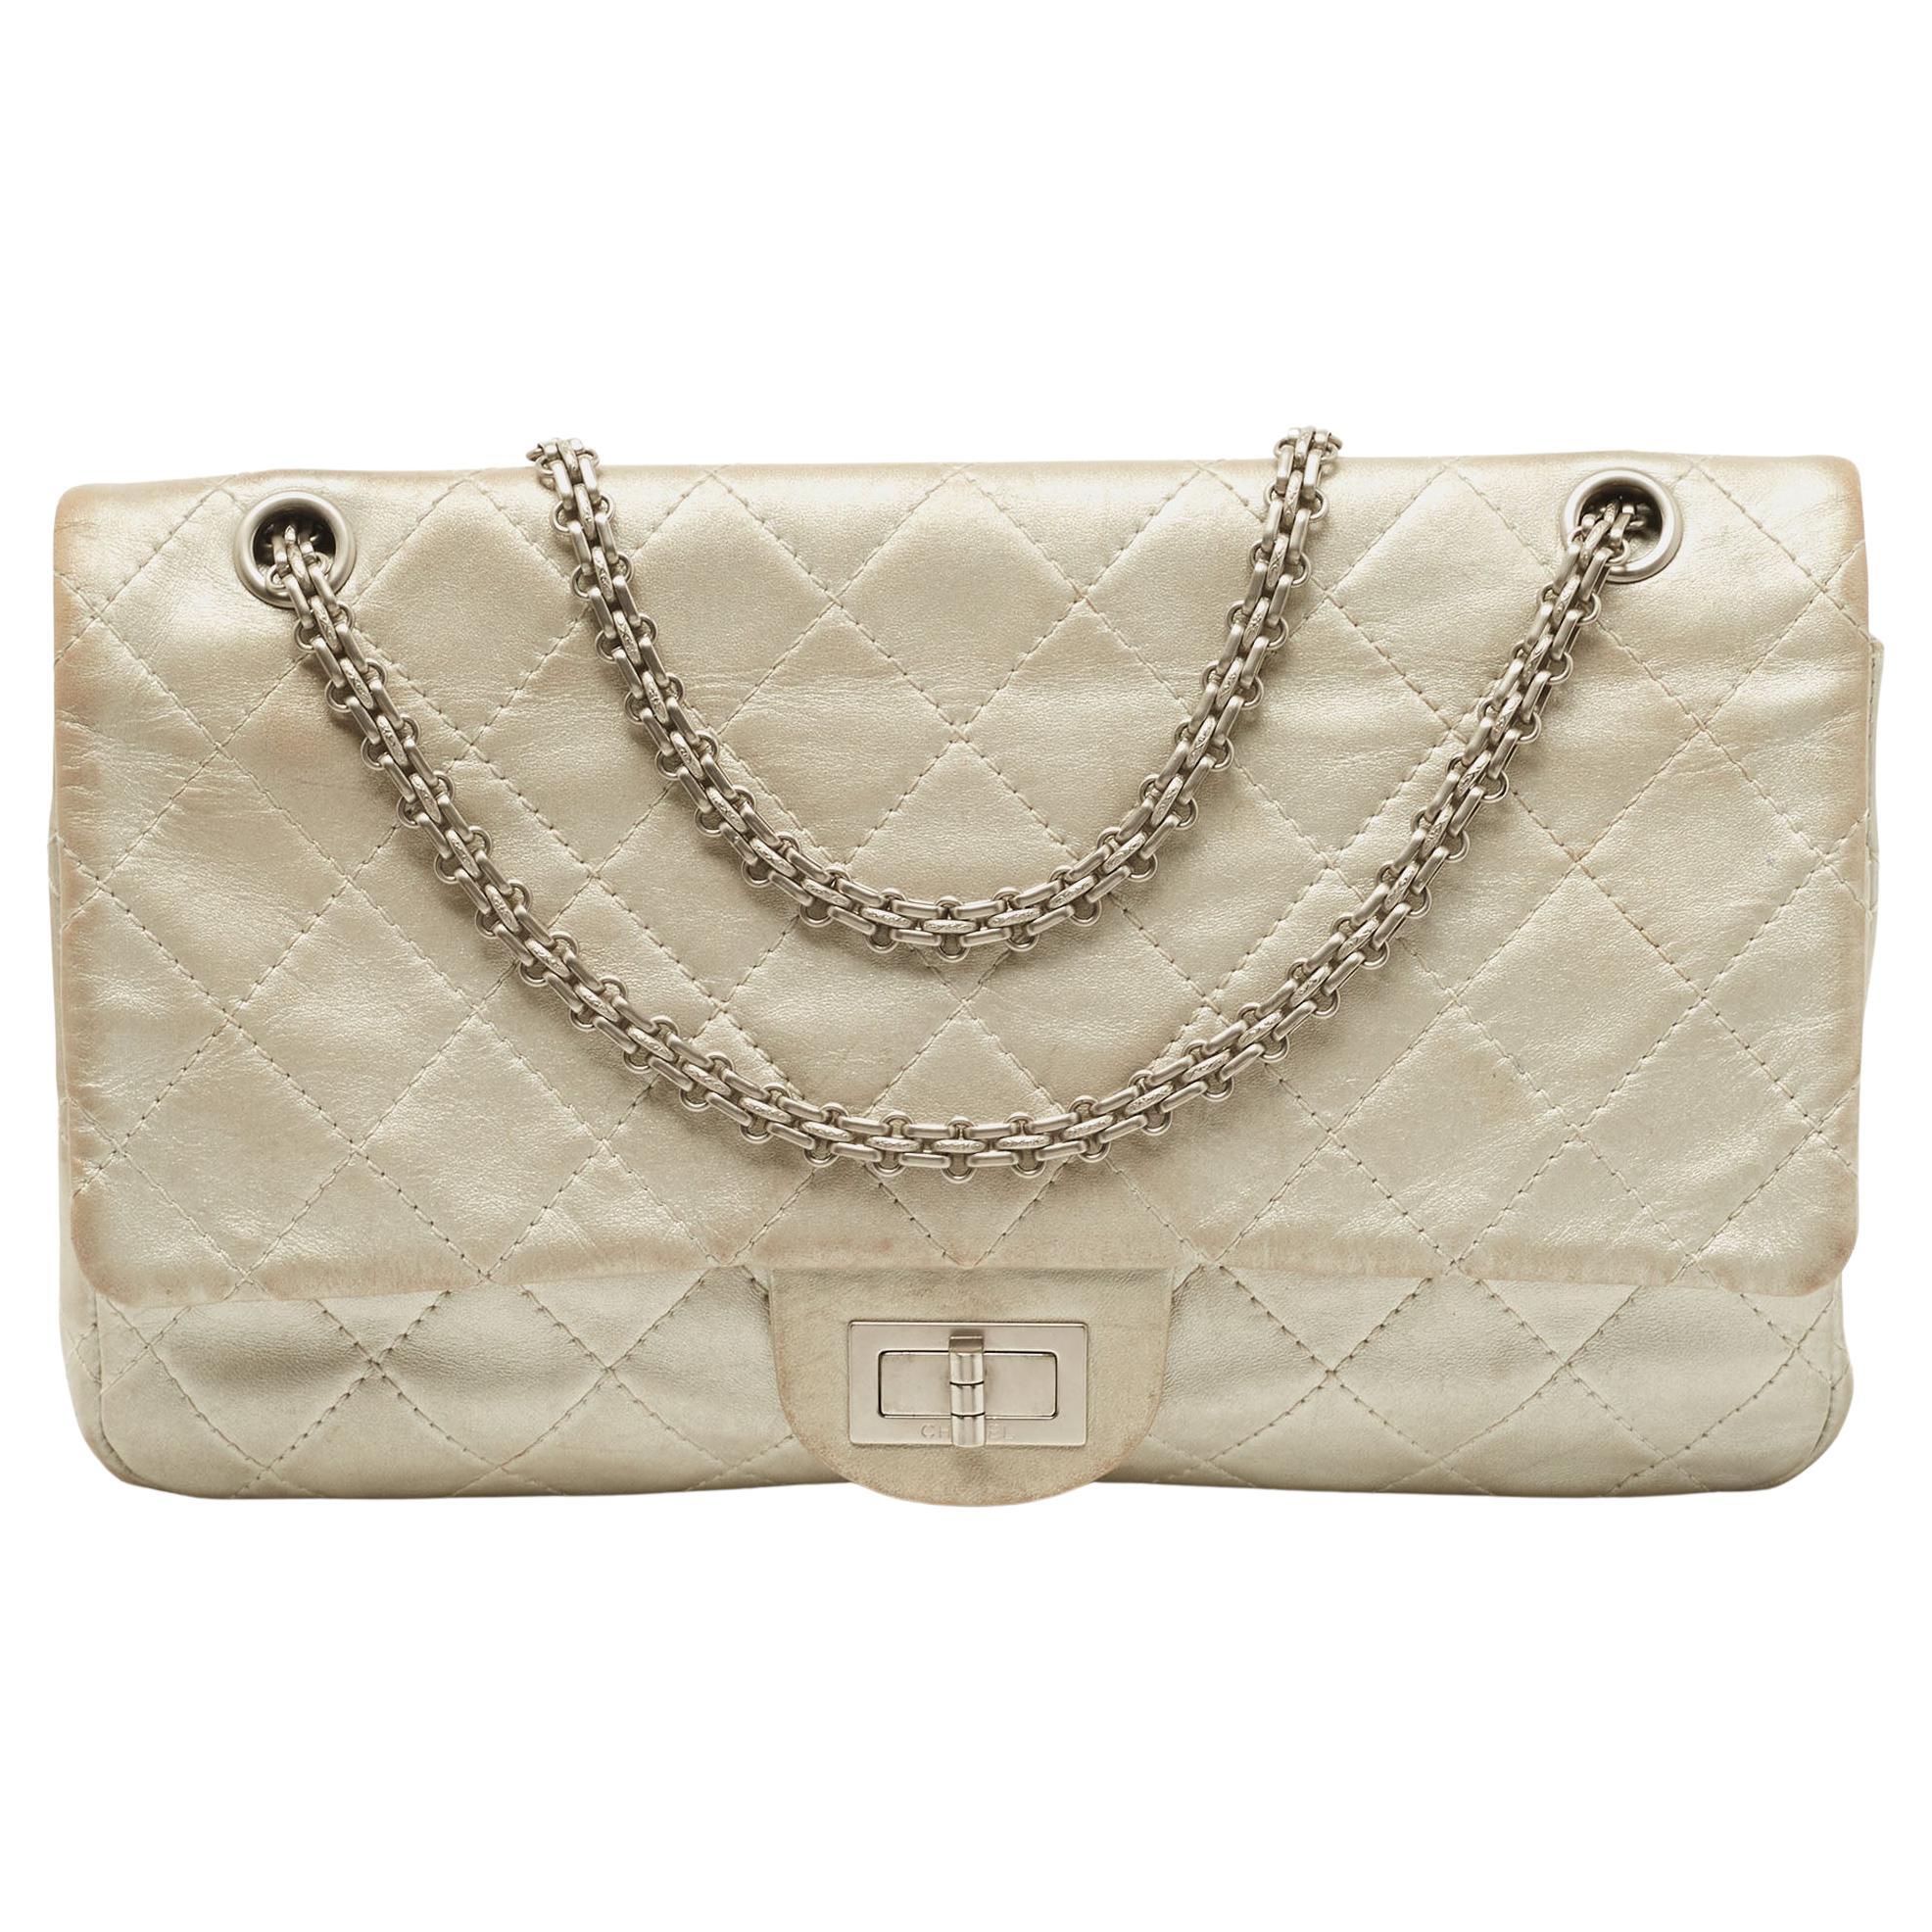 Chanel Silver Quilted Leather 227 Reissue 2.55 Flap Bag